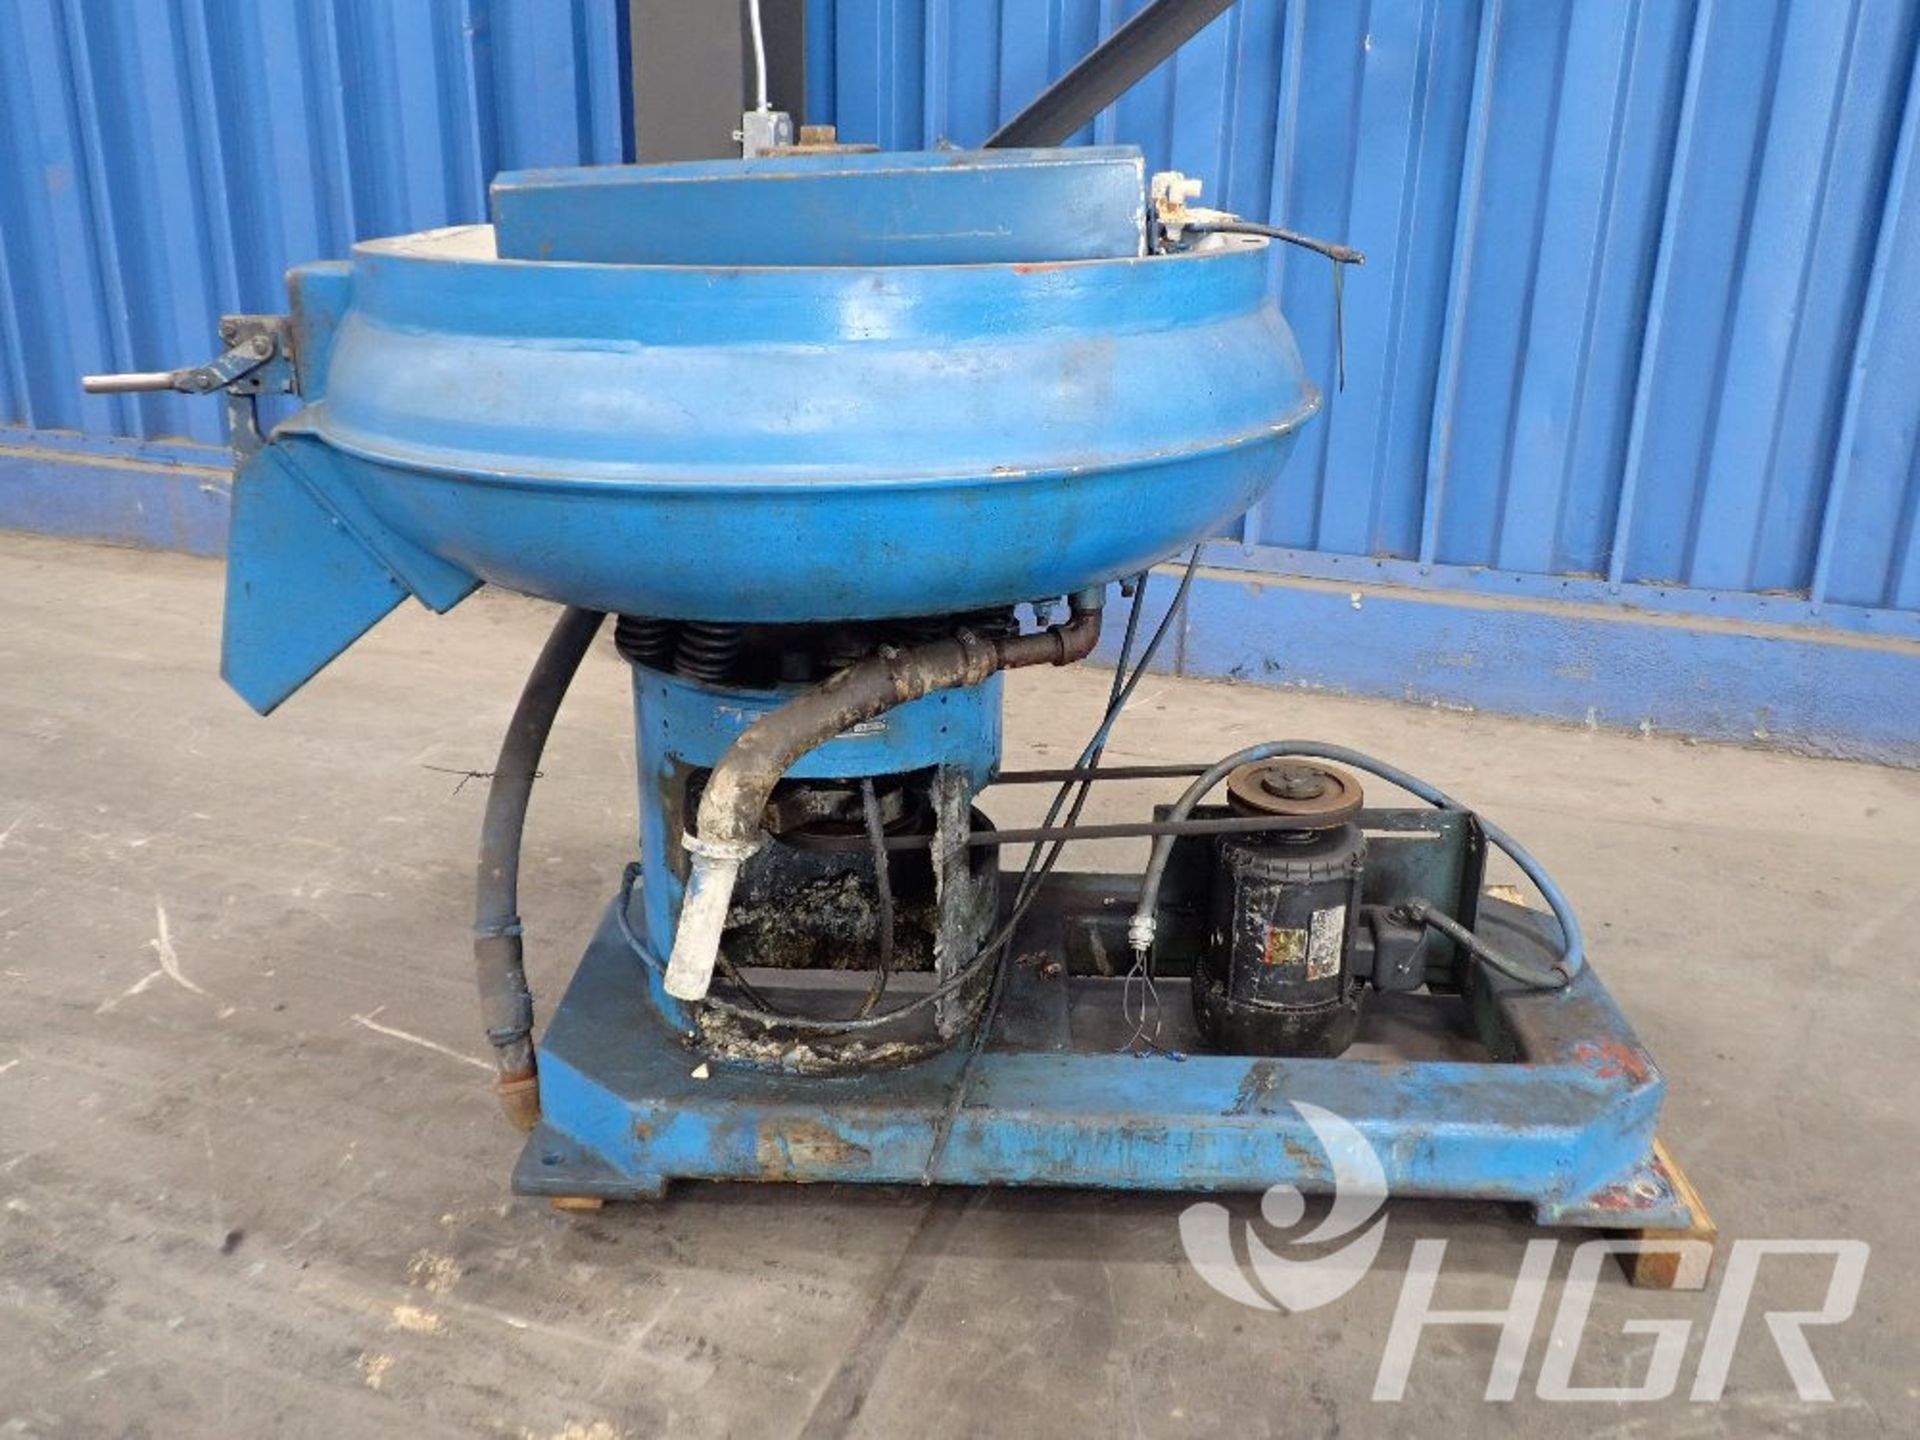 ALMCO VIBRATORY FINISHER, Model OR-5C, Date: n/a; s/n 37803, Approx. Capacity: 36", Power: n/a, - Image 2 of 10